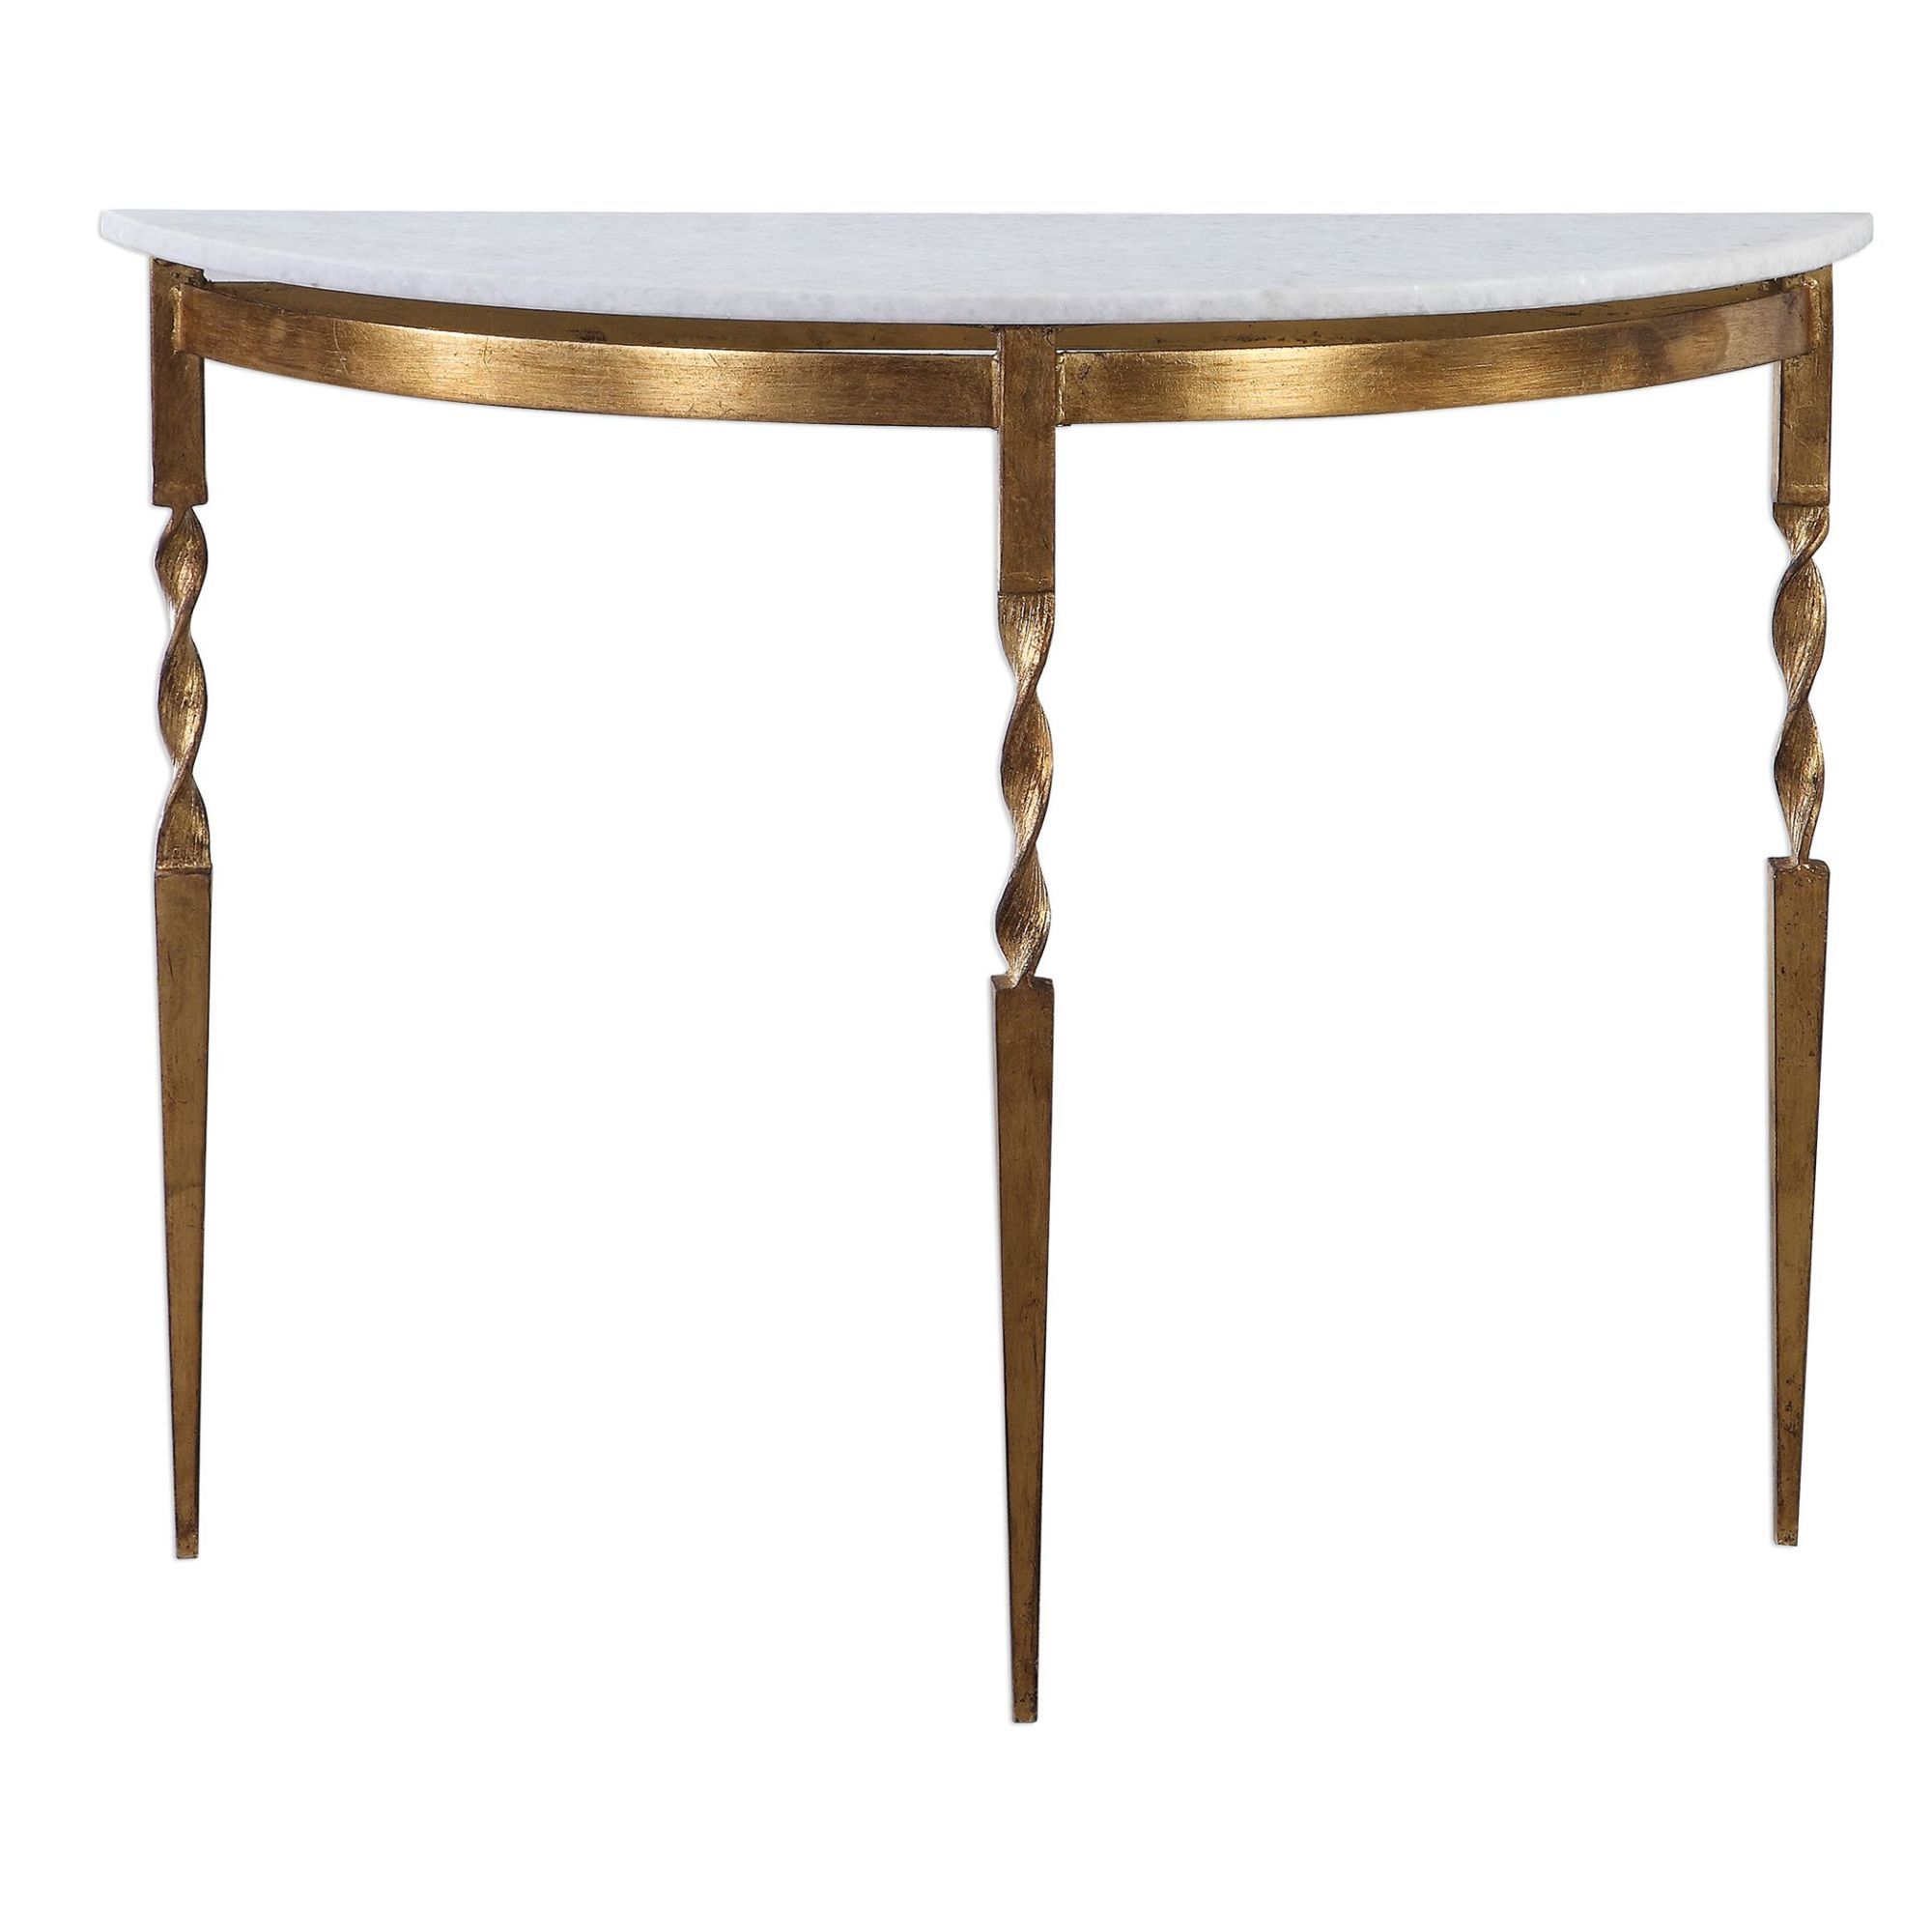 Uttermost 24881 White Marble Imelda 40" Long Marble Top Iron Console Regarding Marble Top Console Tables (View 18 of 20)